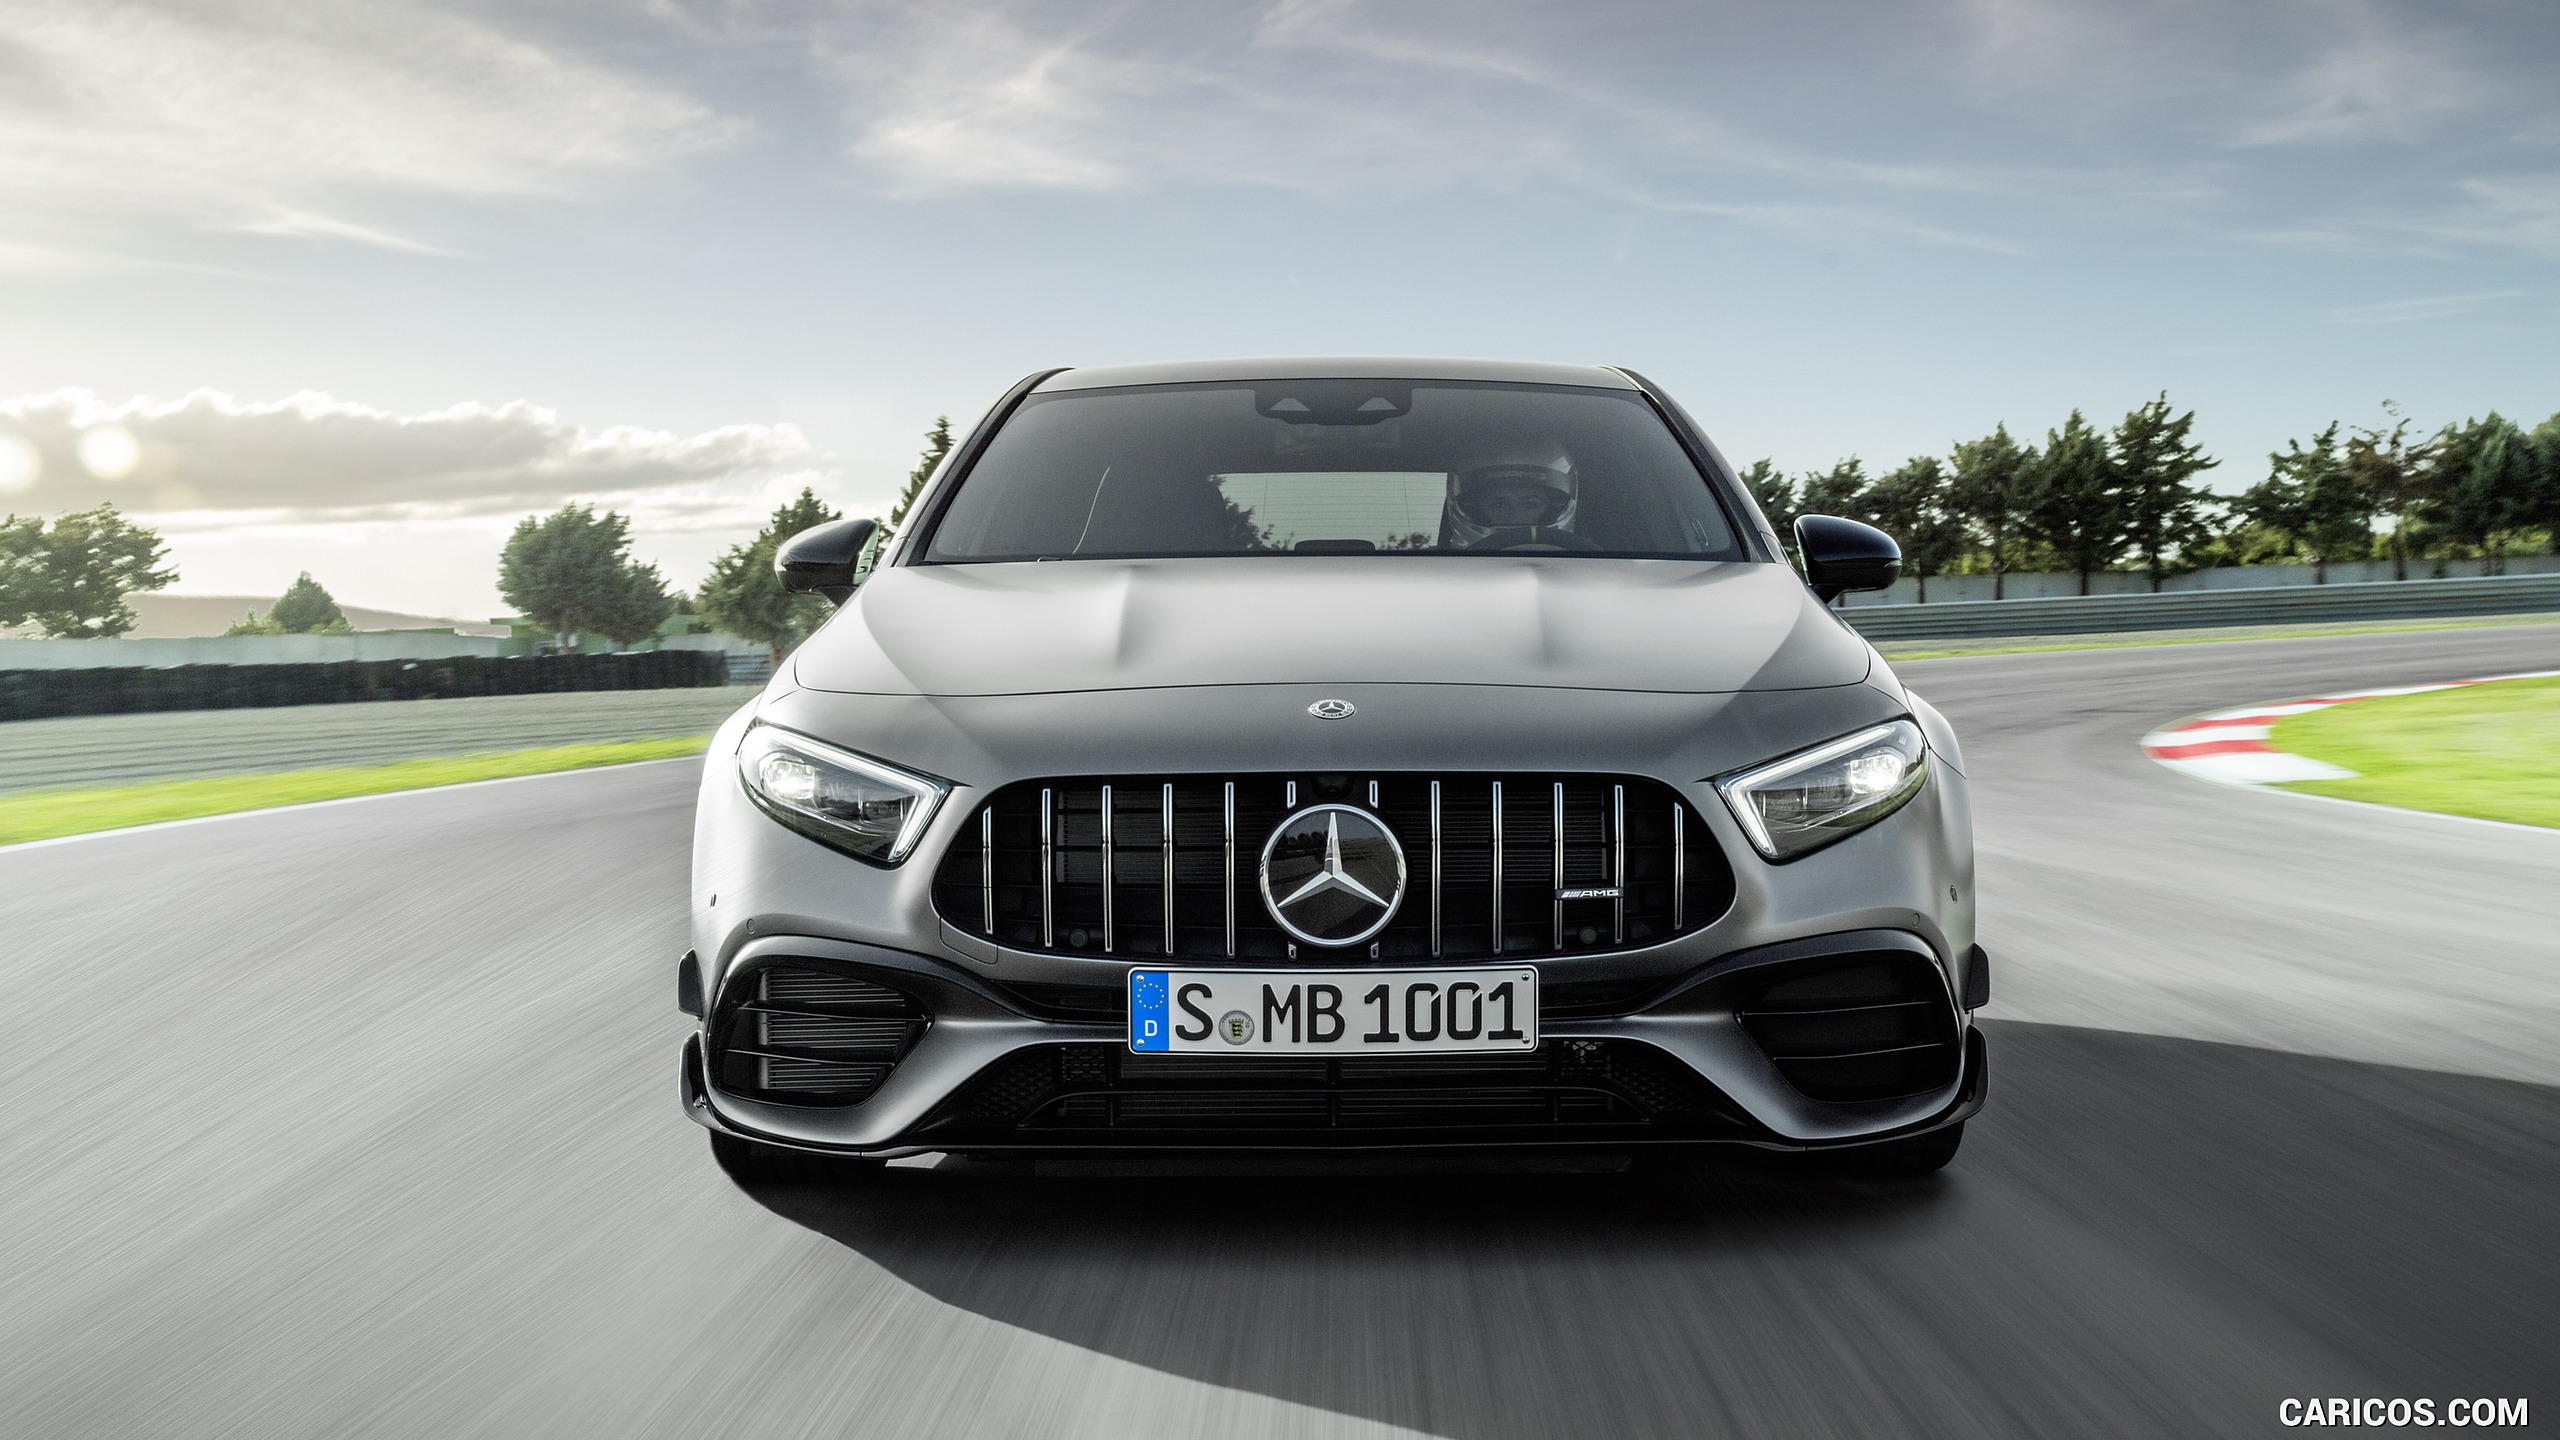 2020 Mercedes-AMG A 45 S 4MATIC+ - Front, #9 of 188